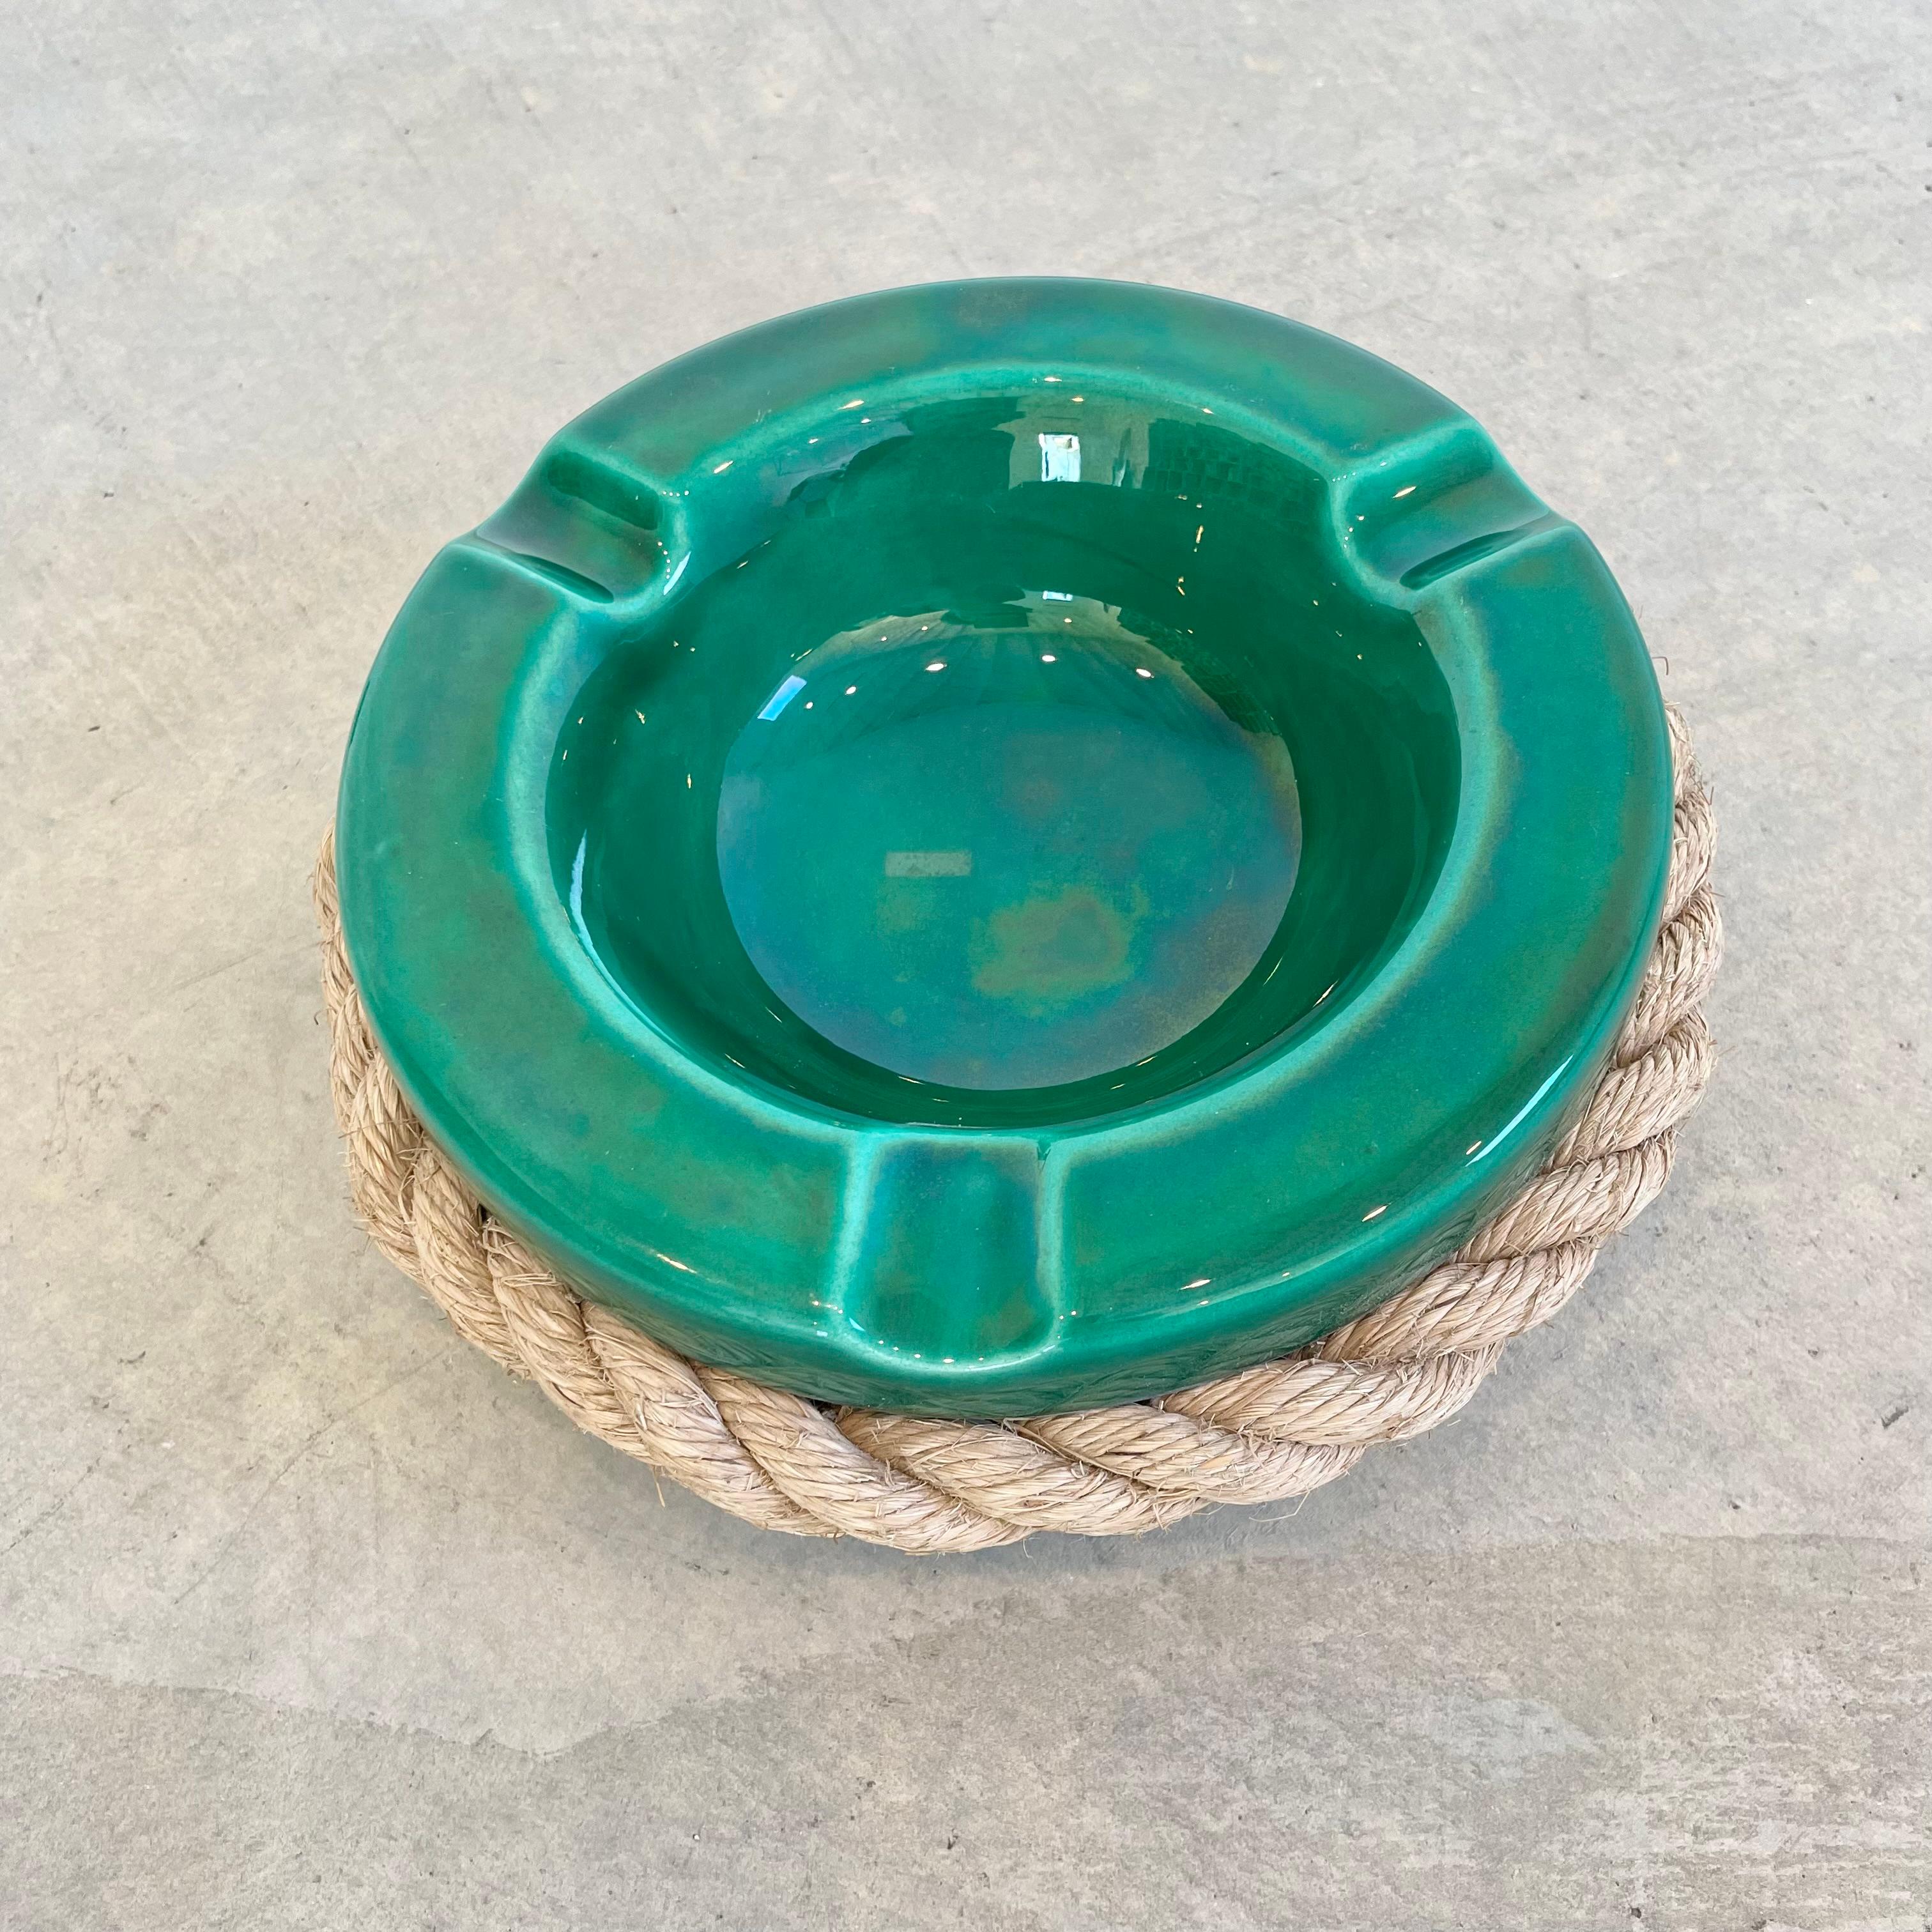 Audoux Minet Style Green Ceramic Ashtray with Rope, 1970s France 3